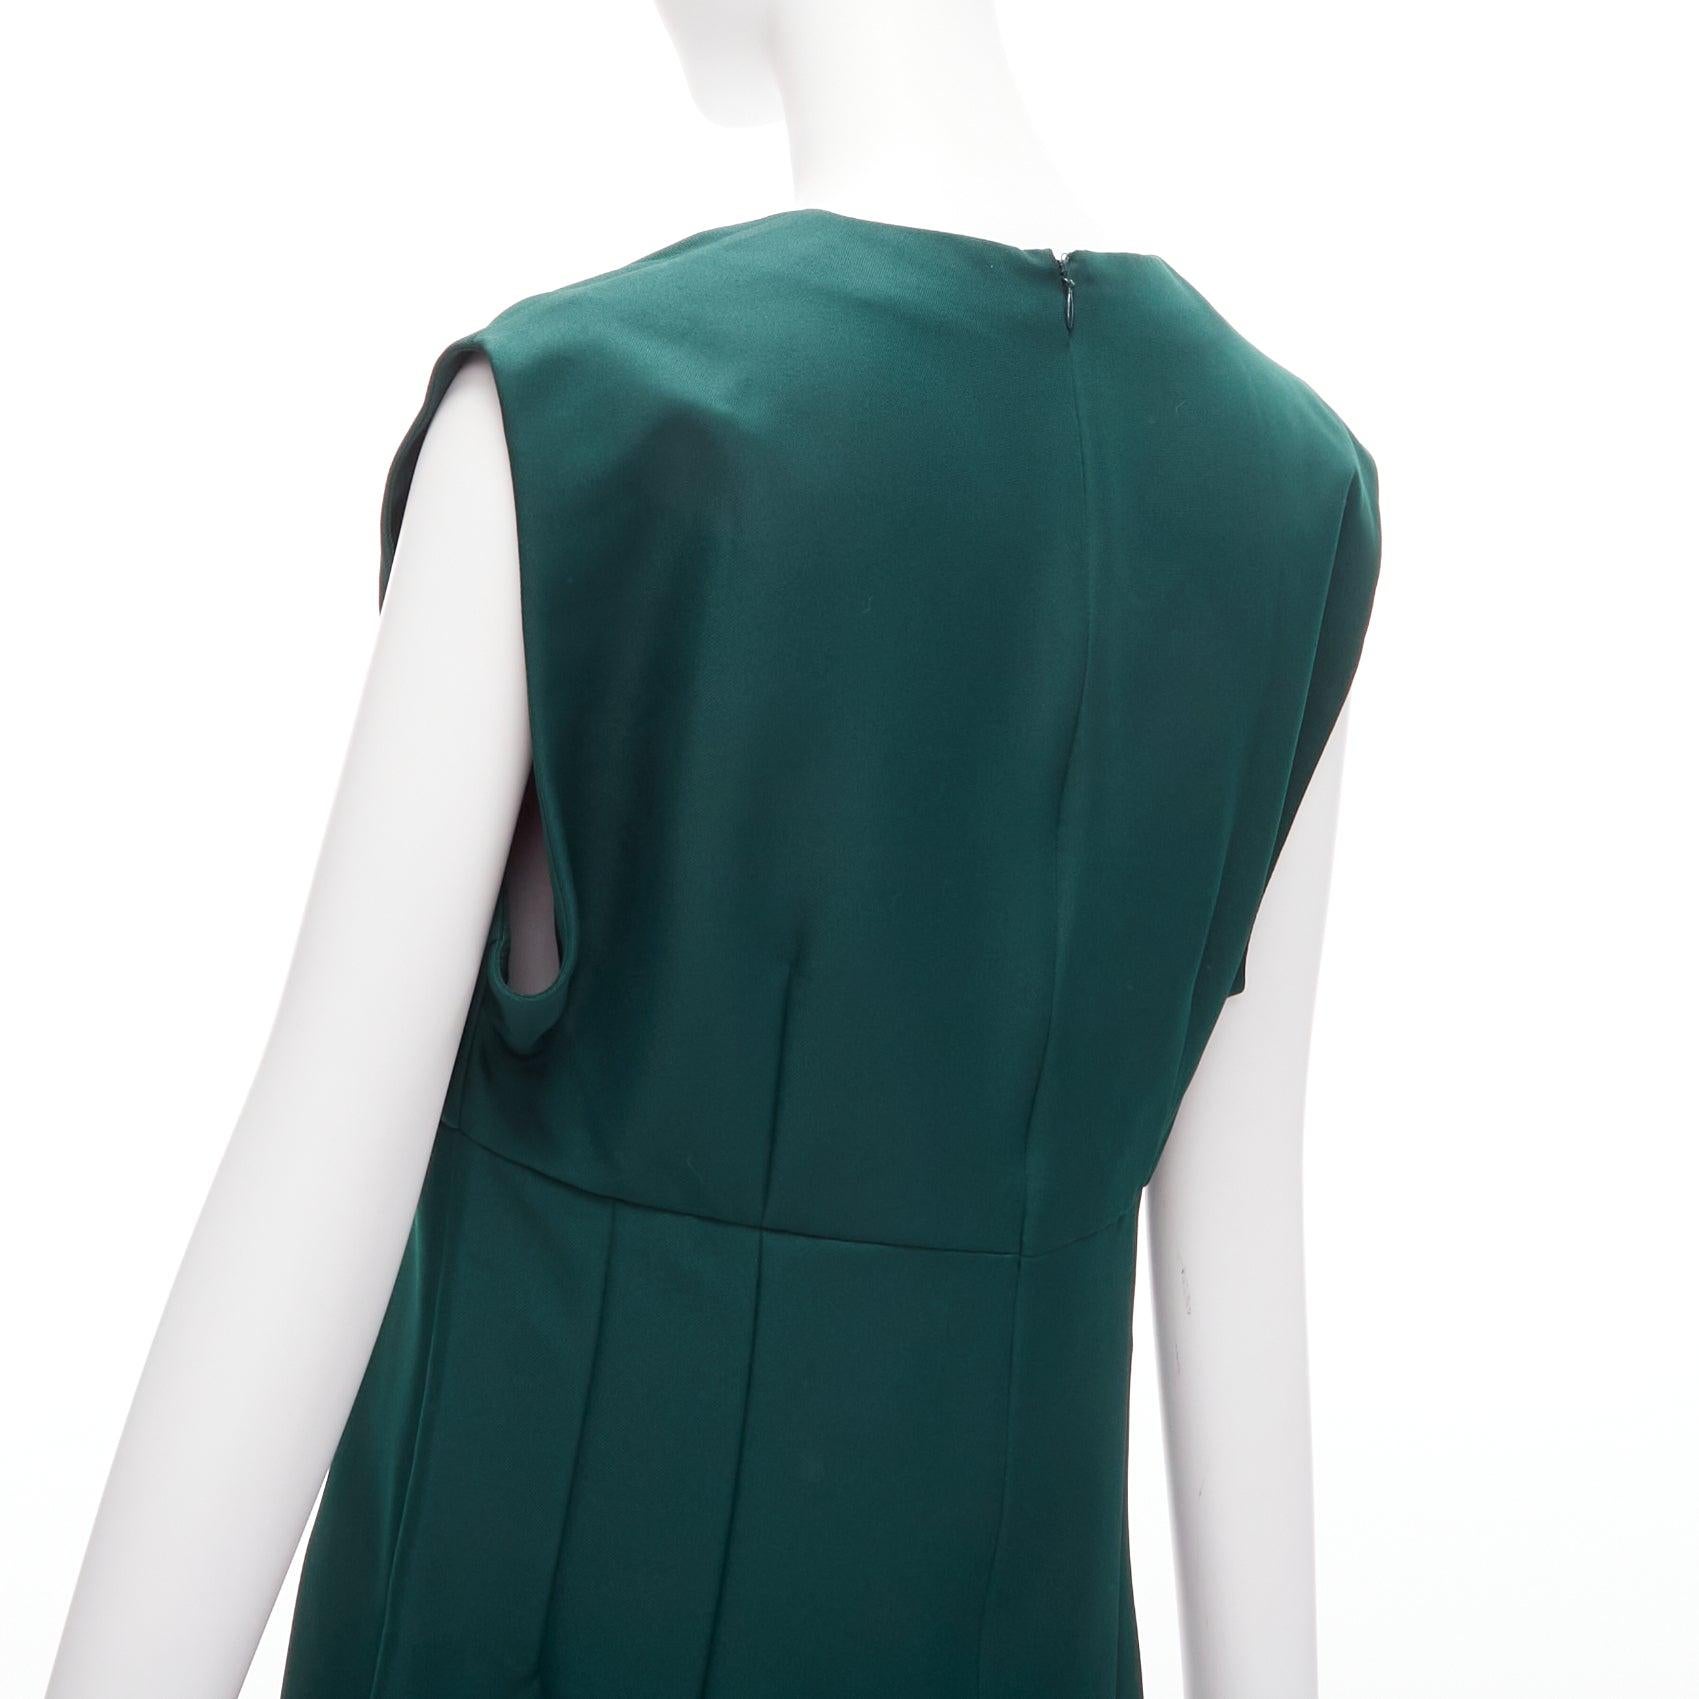 MARNI green twill V neck dart pleat waist sleeveless boxy dress IT40 S
Reference: CELG/A00280
Brand: Marni
Material: Polyester
Color: Green
Pattern: Solid
Closure: Zip
Extra Details: Bias cut flatters body. Back zip.
Made in: